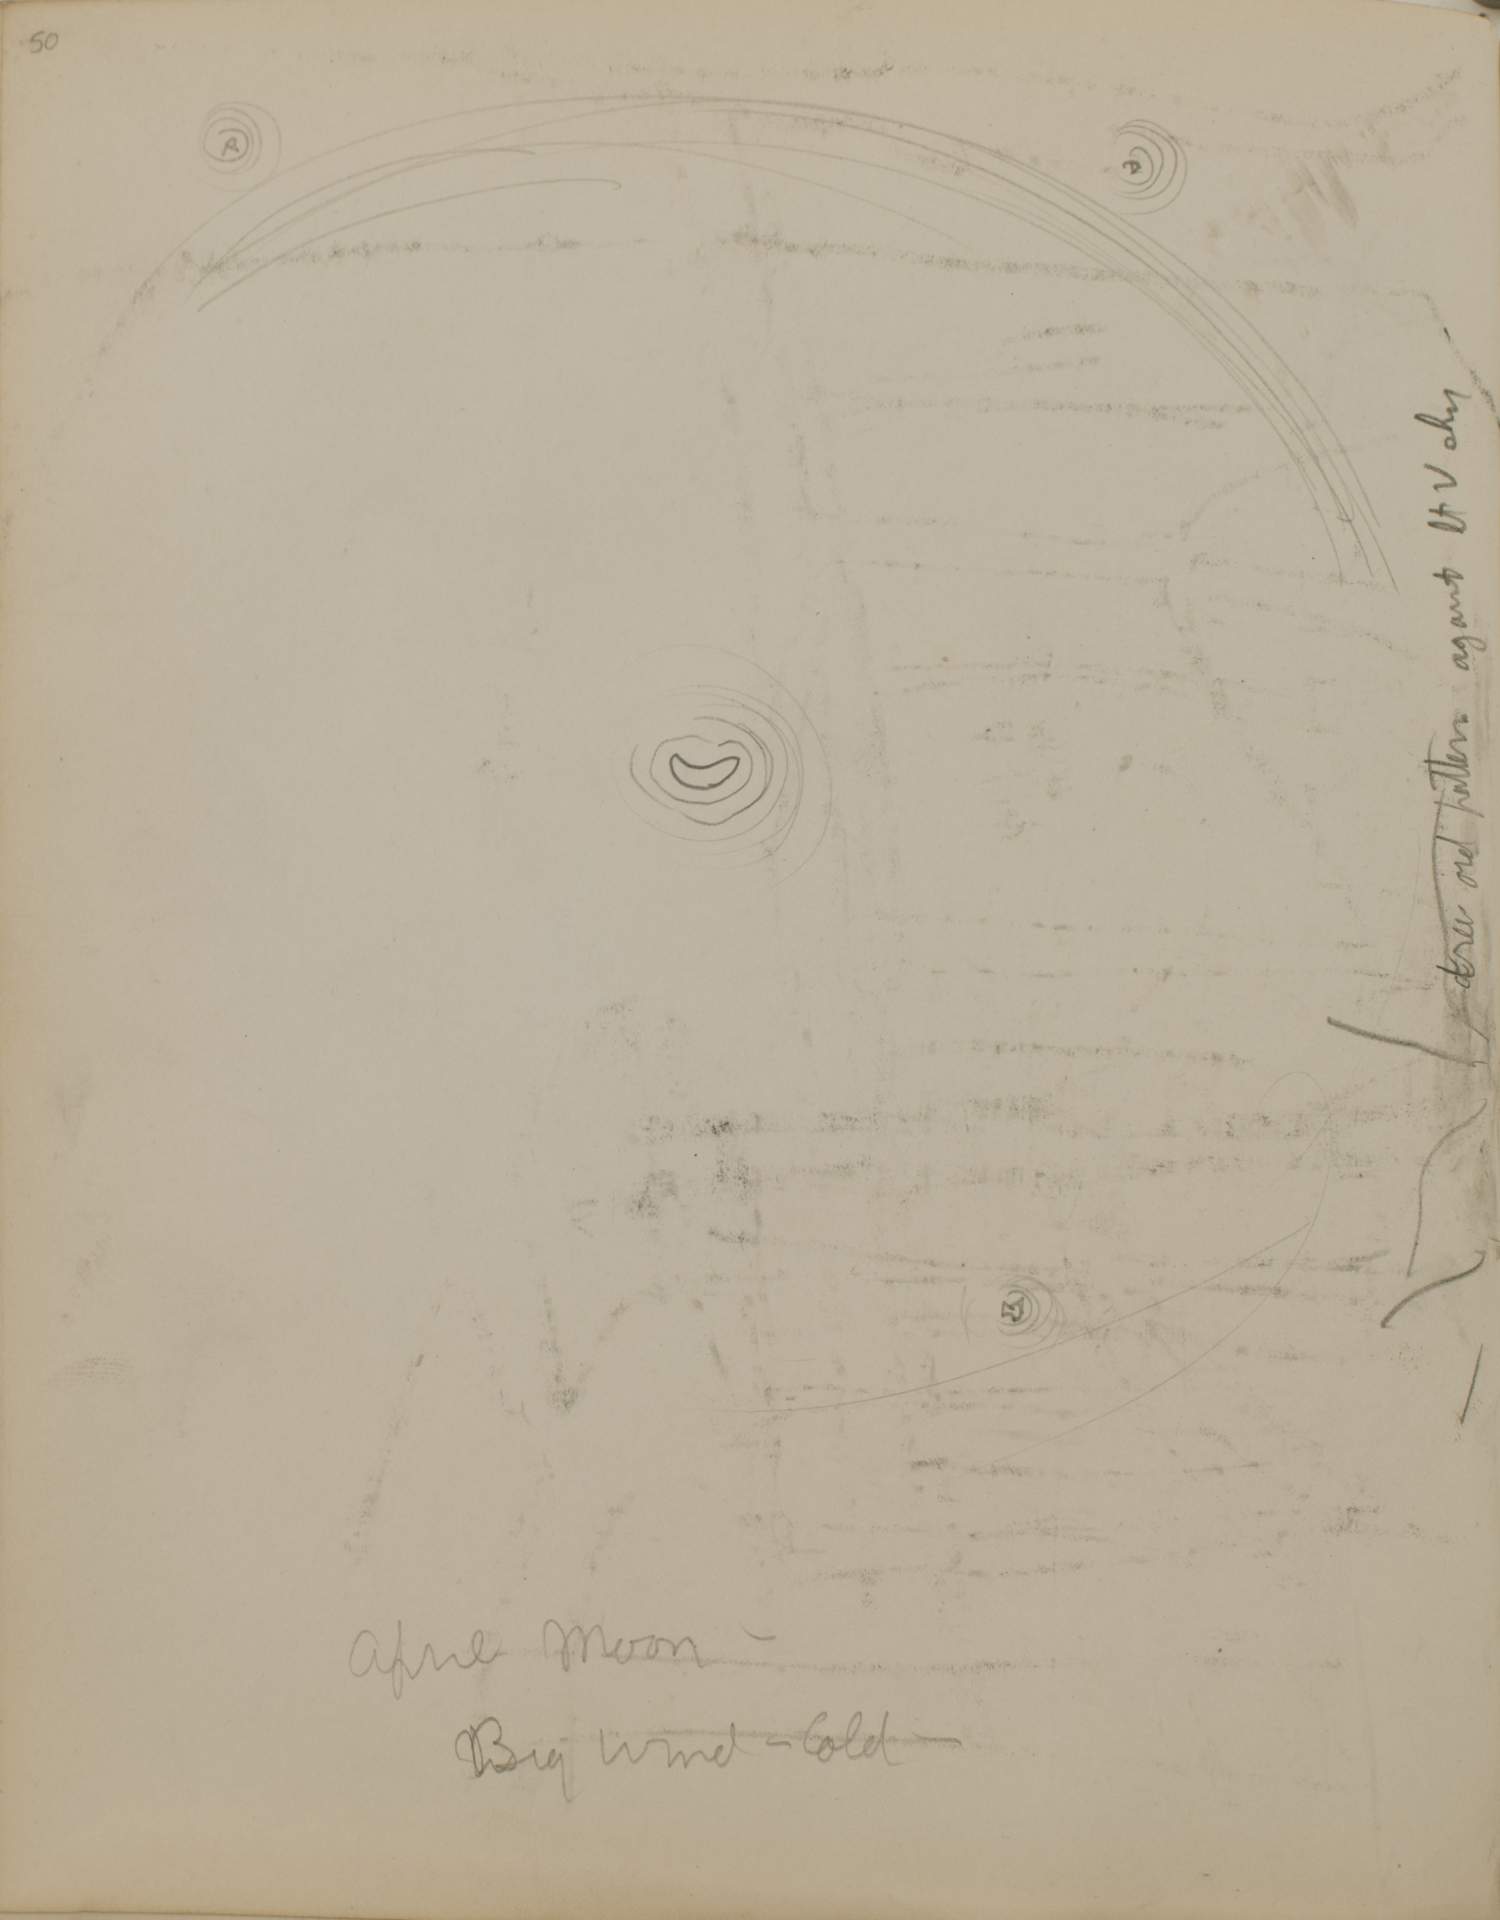 Untitled (sketch of the moon)